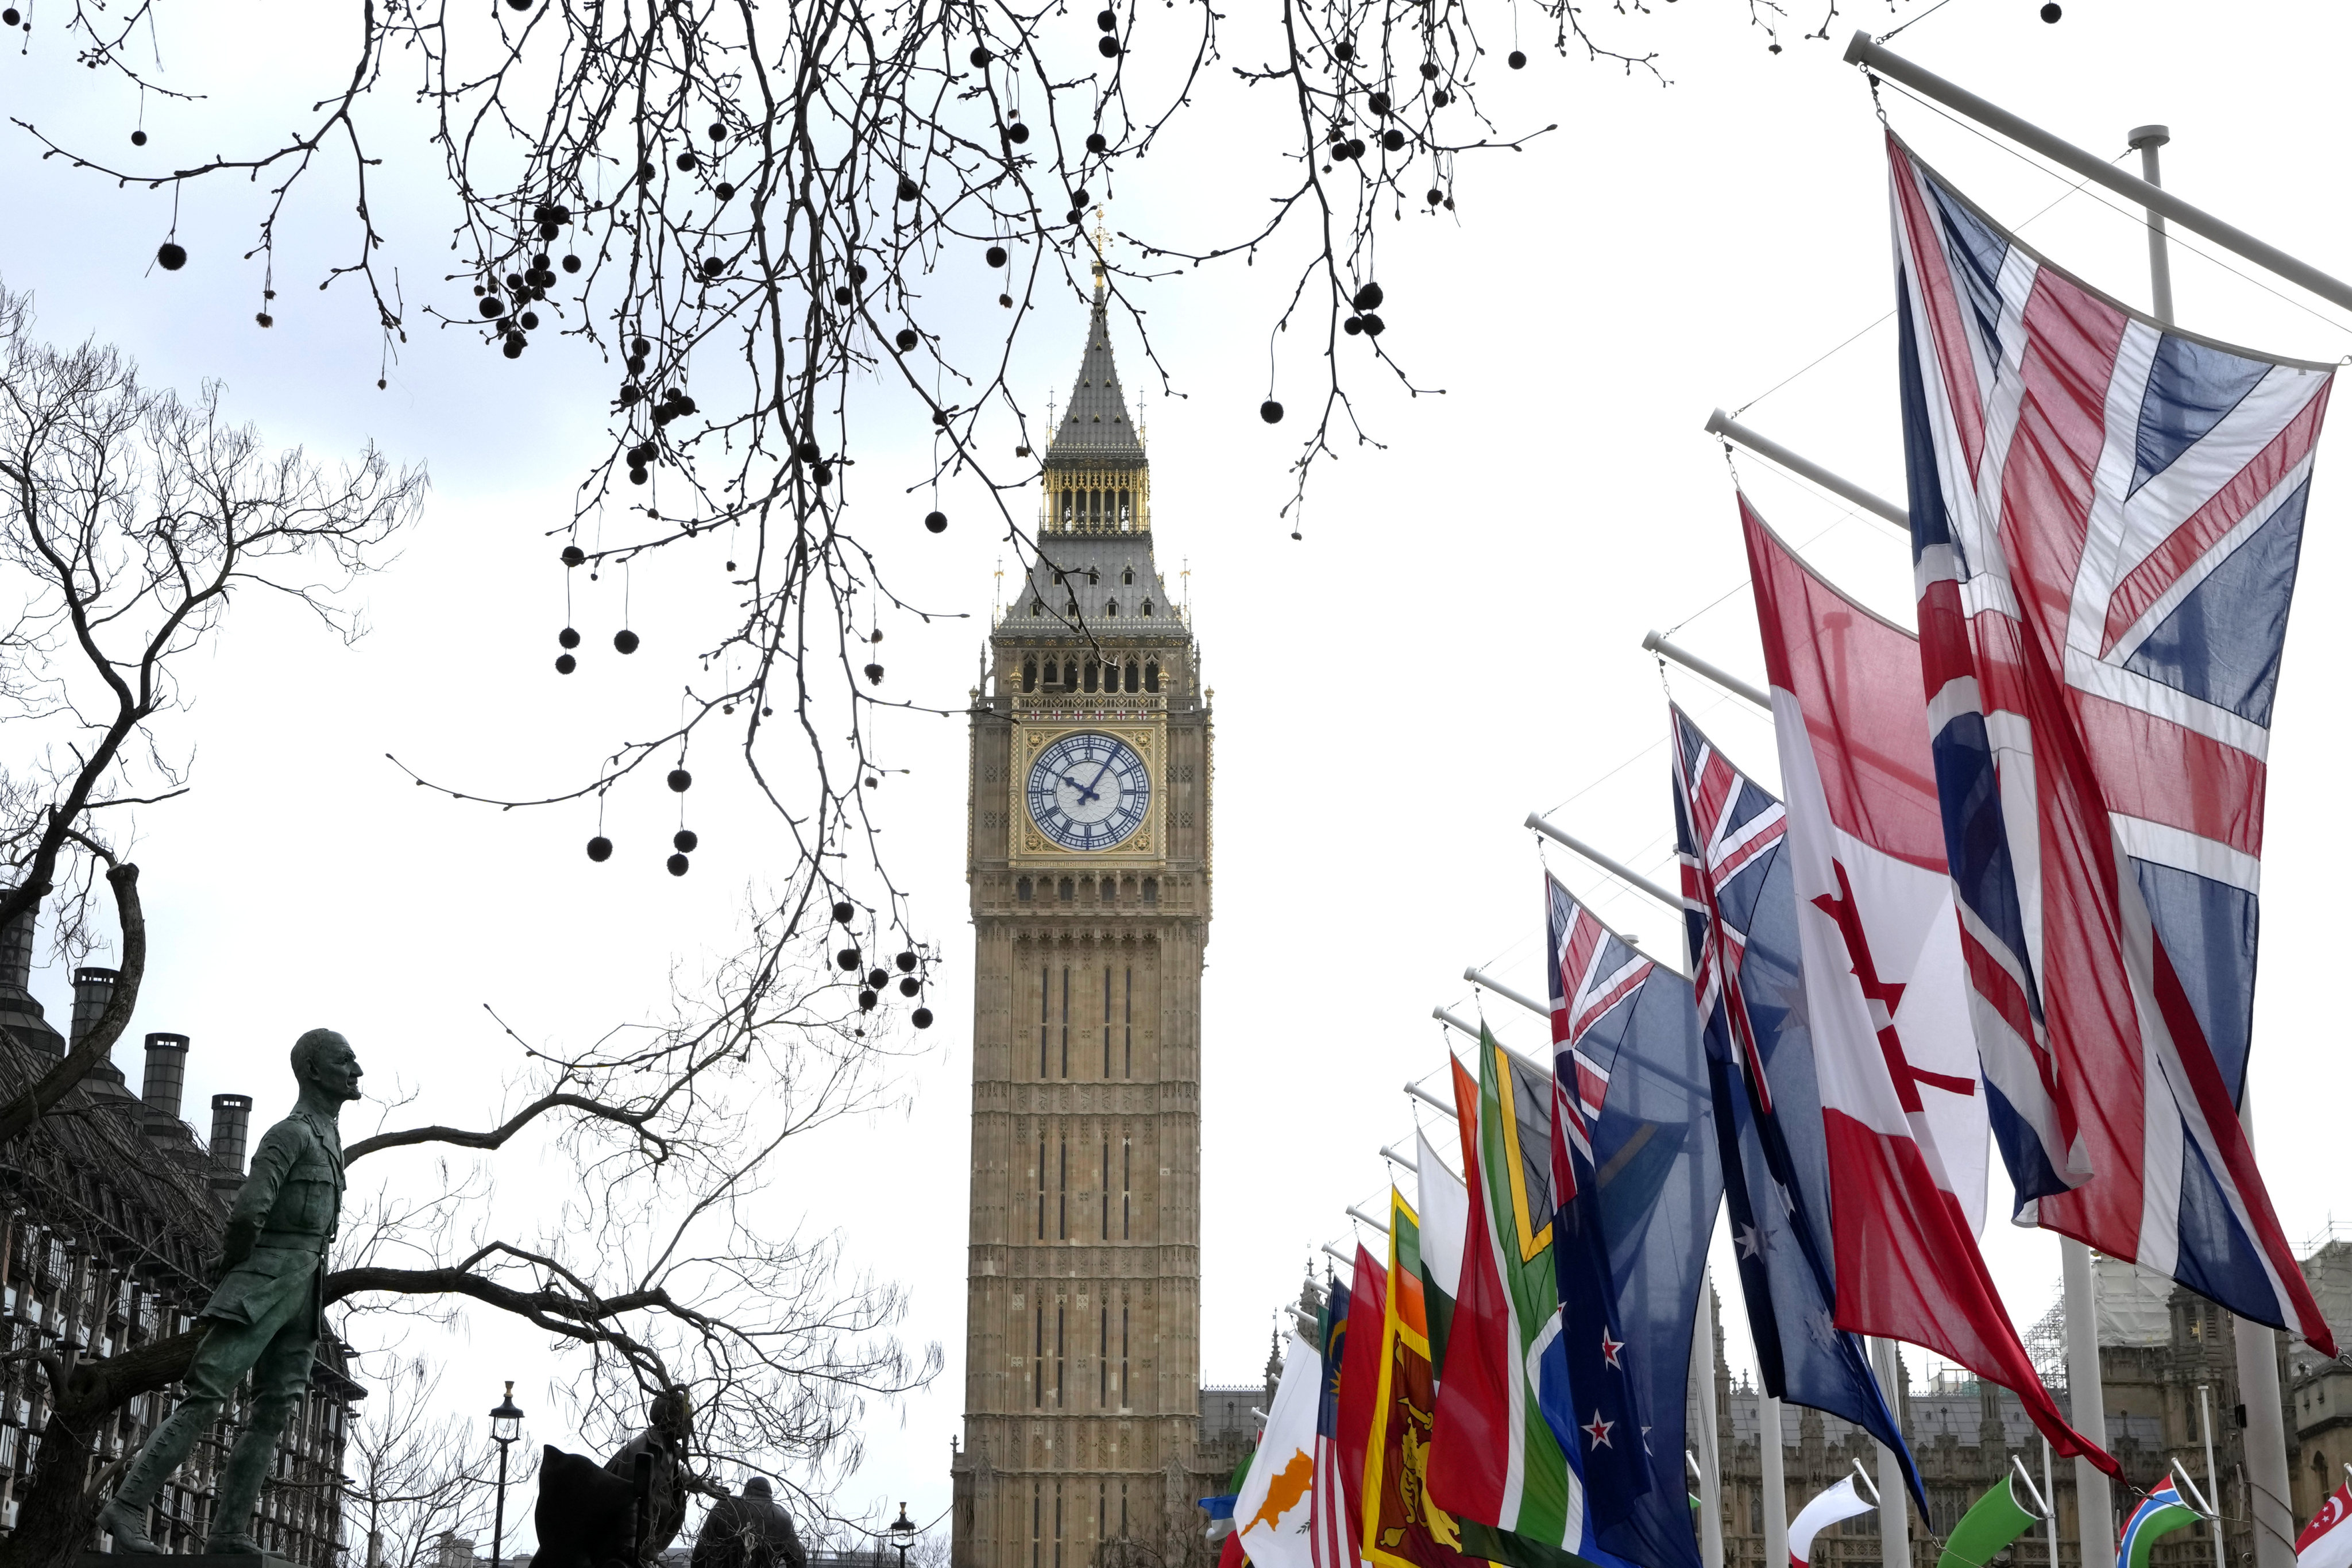 Flags of the Commonwealth countries fly near the Elizabeth Tower, known as “Big Ben”, in Parliament Square in London on March 13. Photo: AP